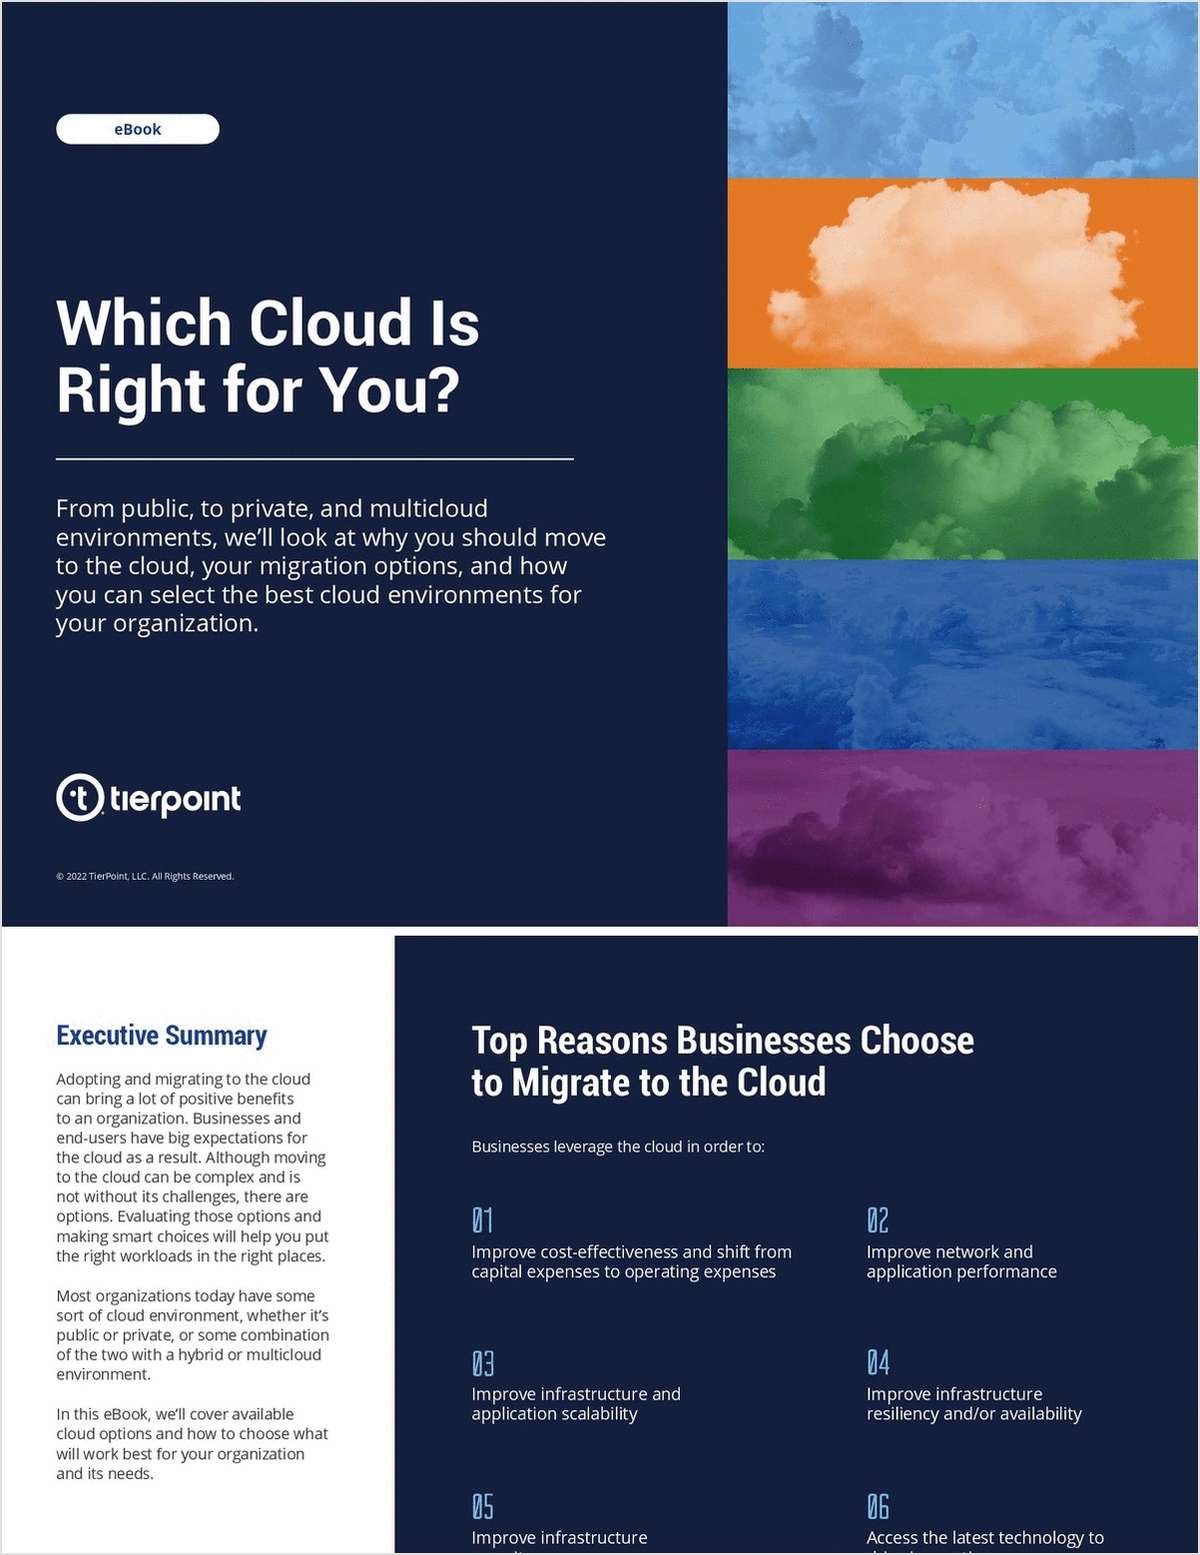 eBook: Which Cloud is Right for You?